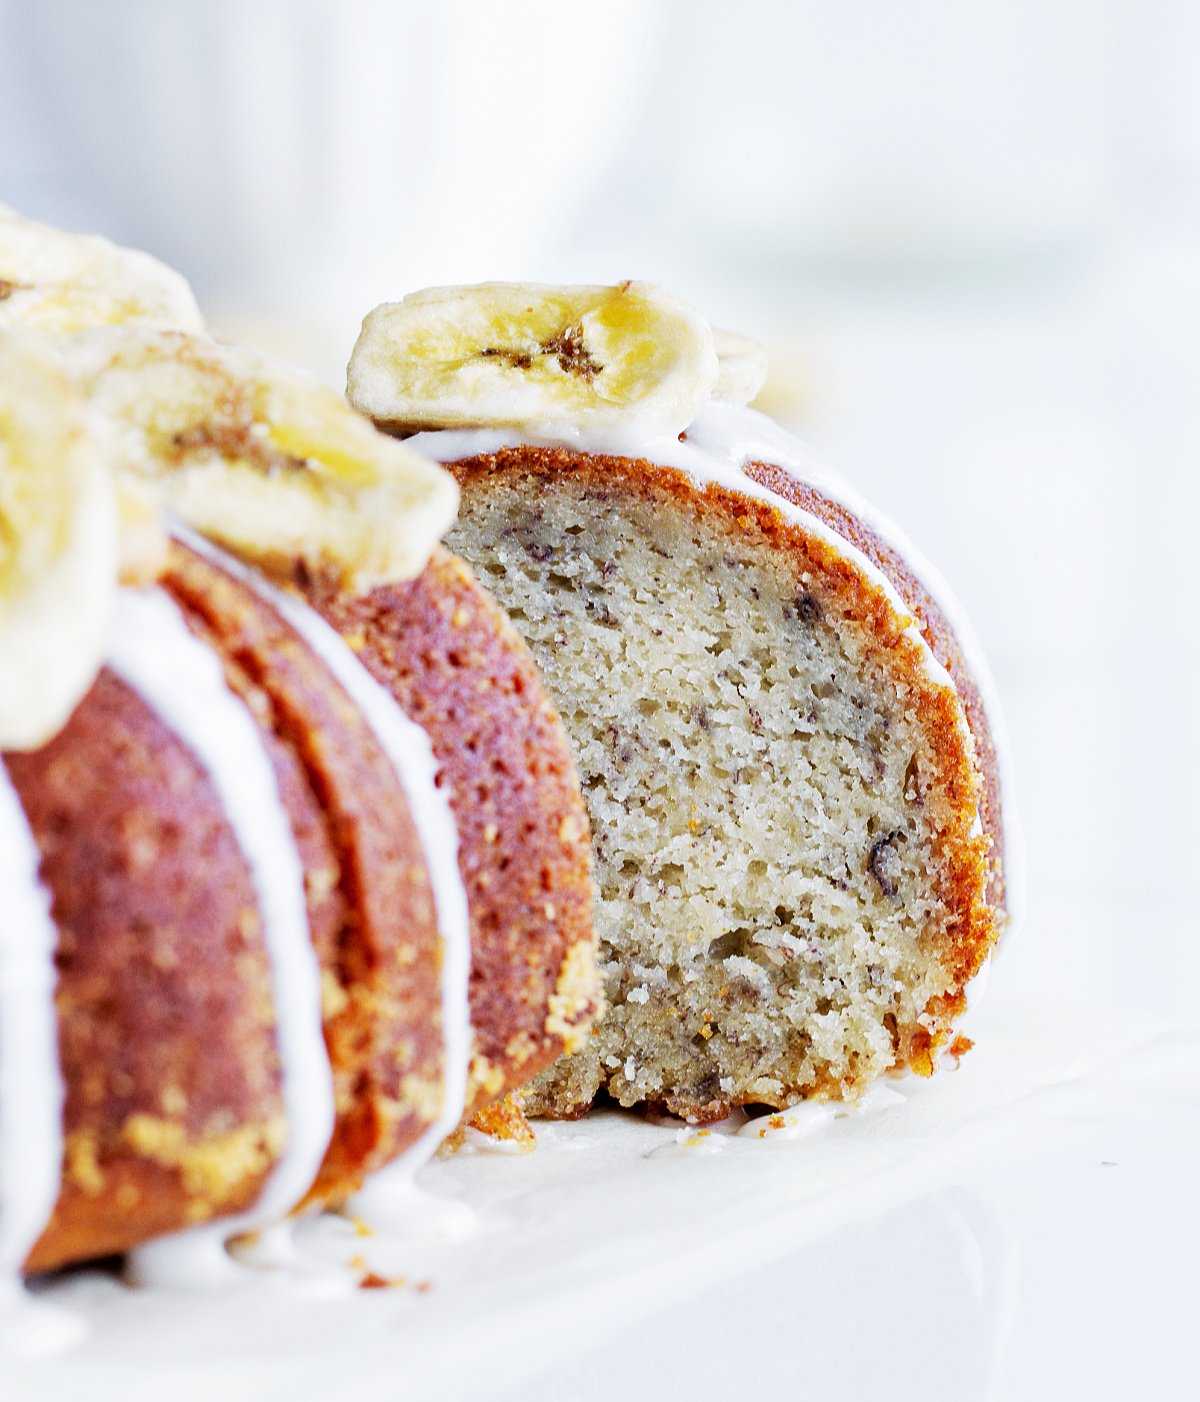 Slice of banana cake pulled out from whole bundt, white background